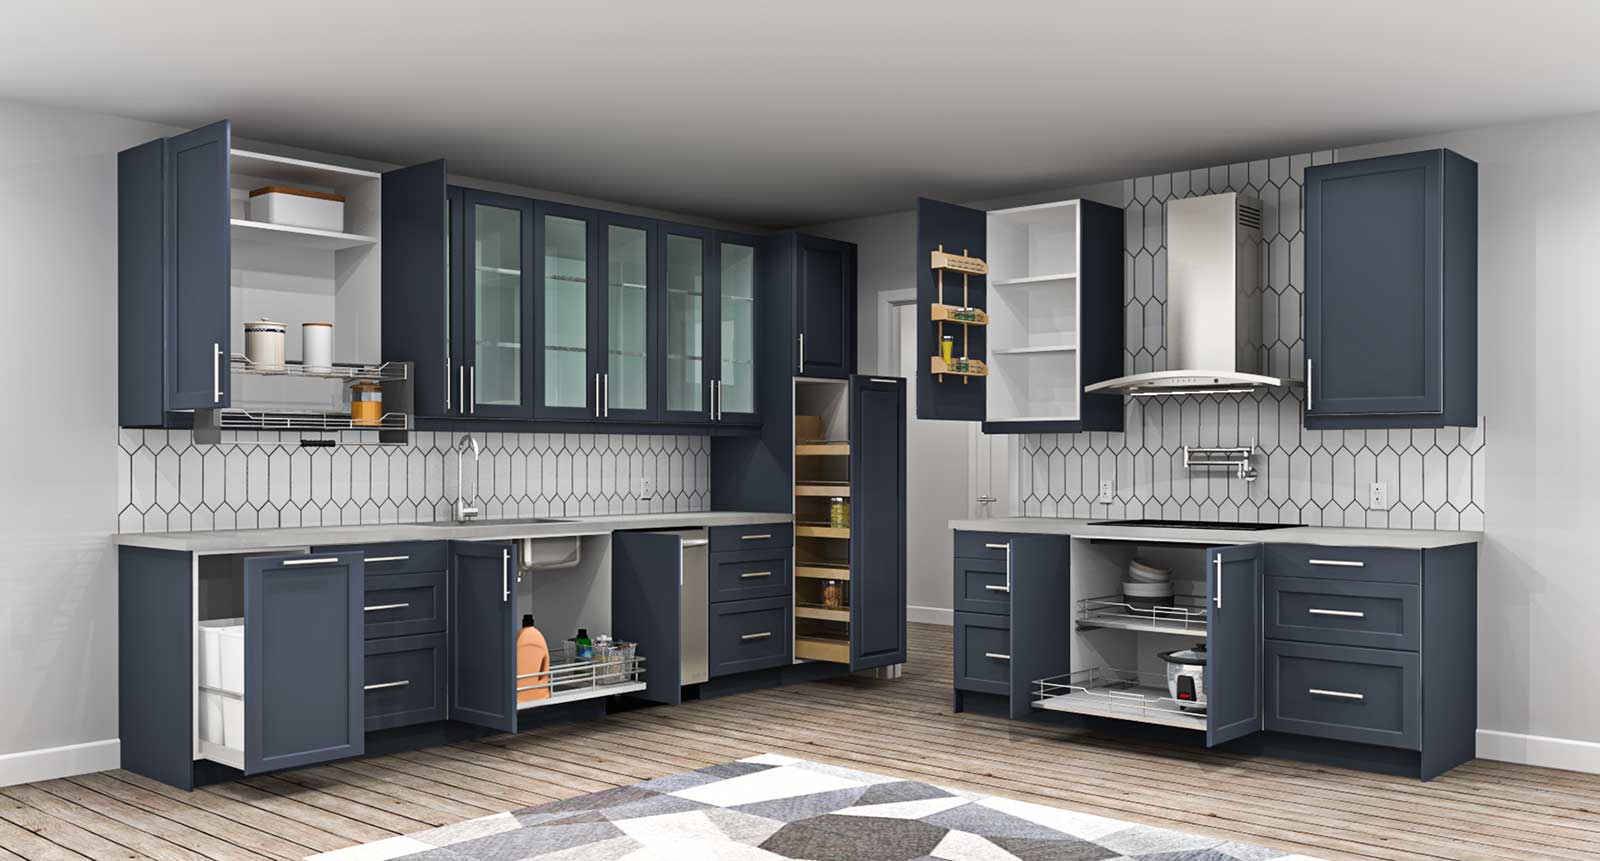 1 An Ikea Kitchen Designed From The Inside Out 